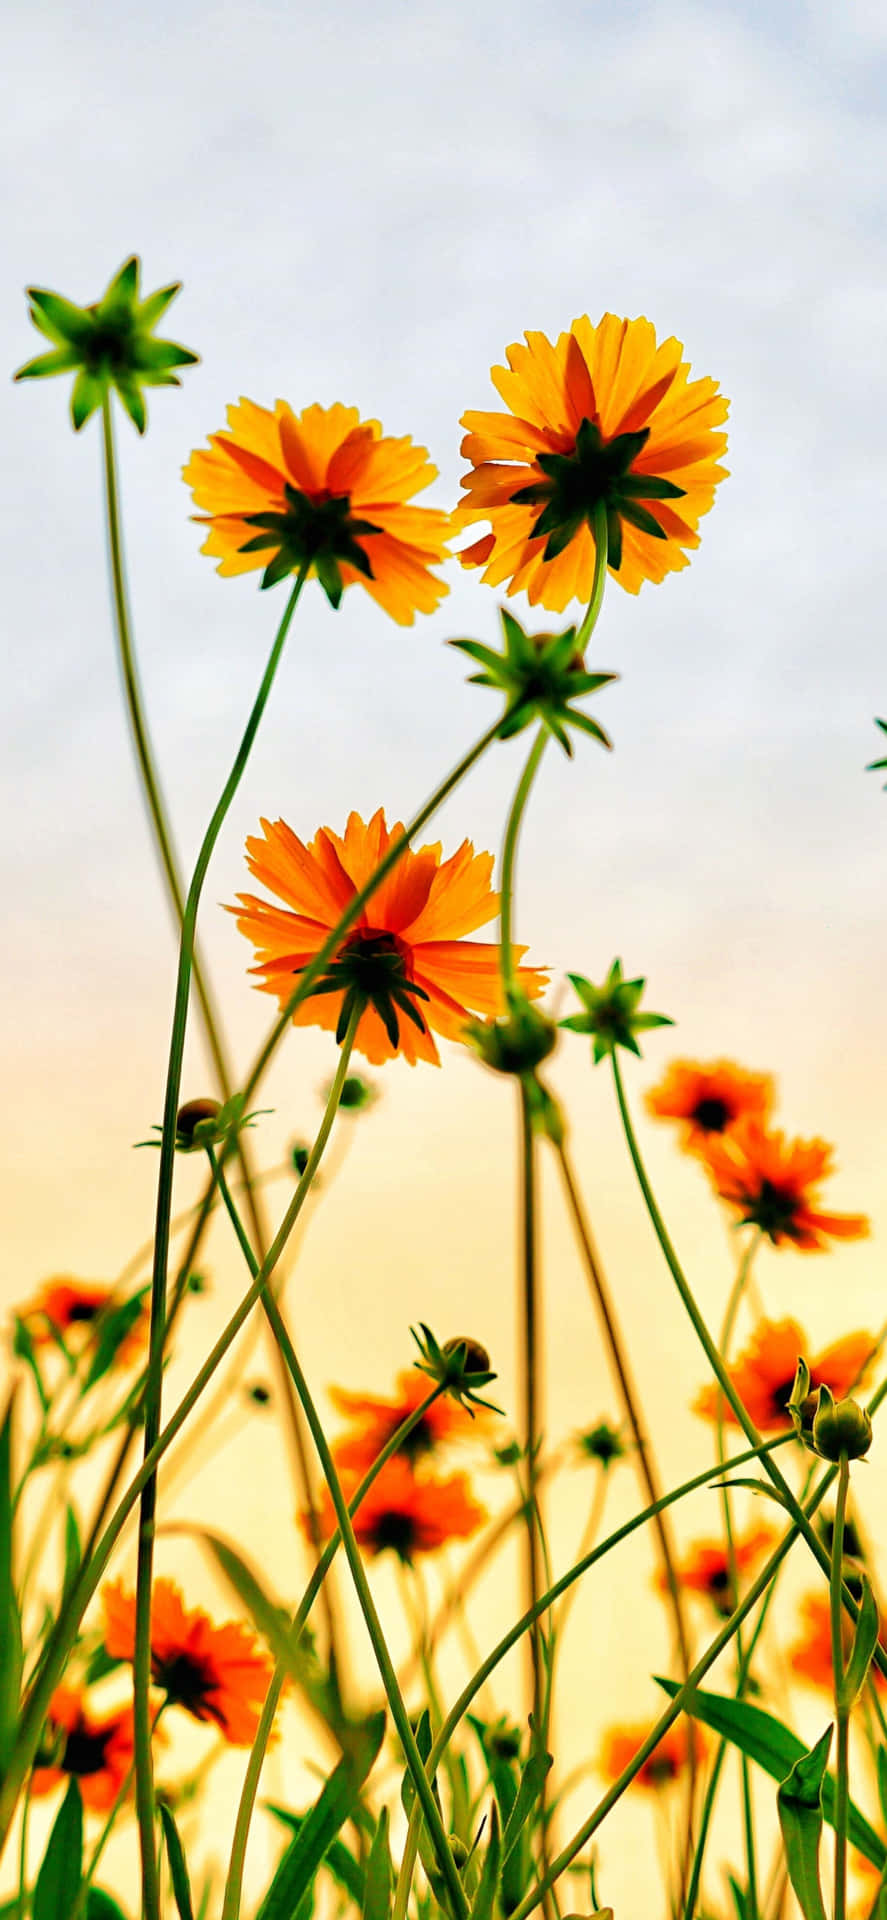 Get the perfect summer iPhone background to capture the season!